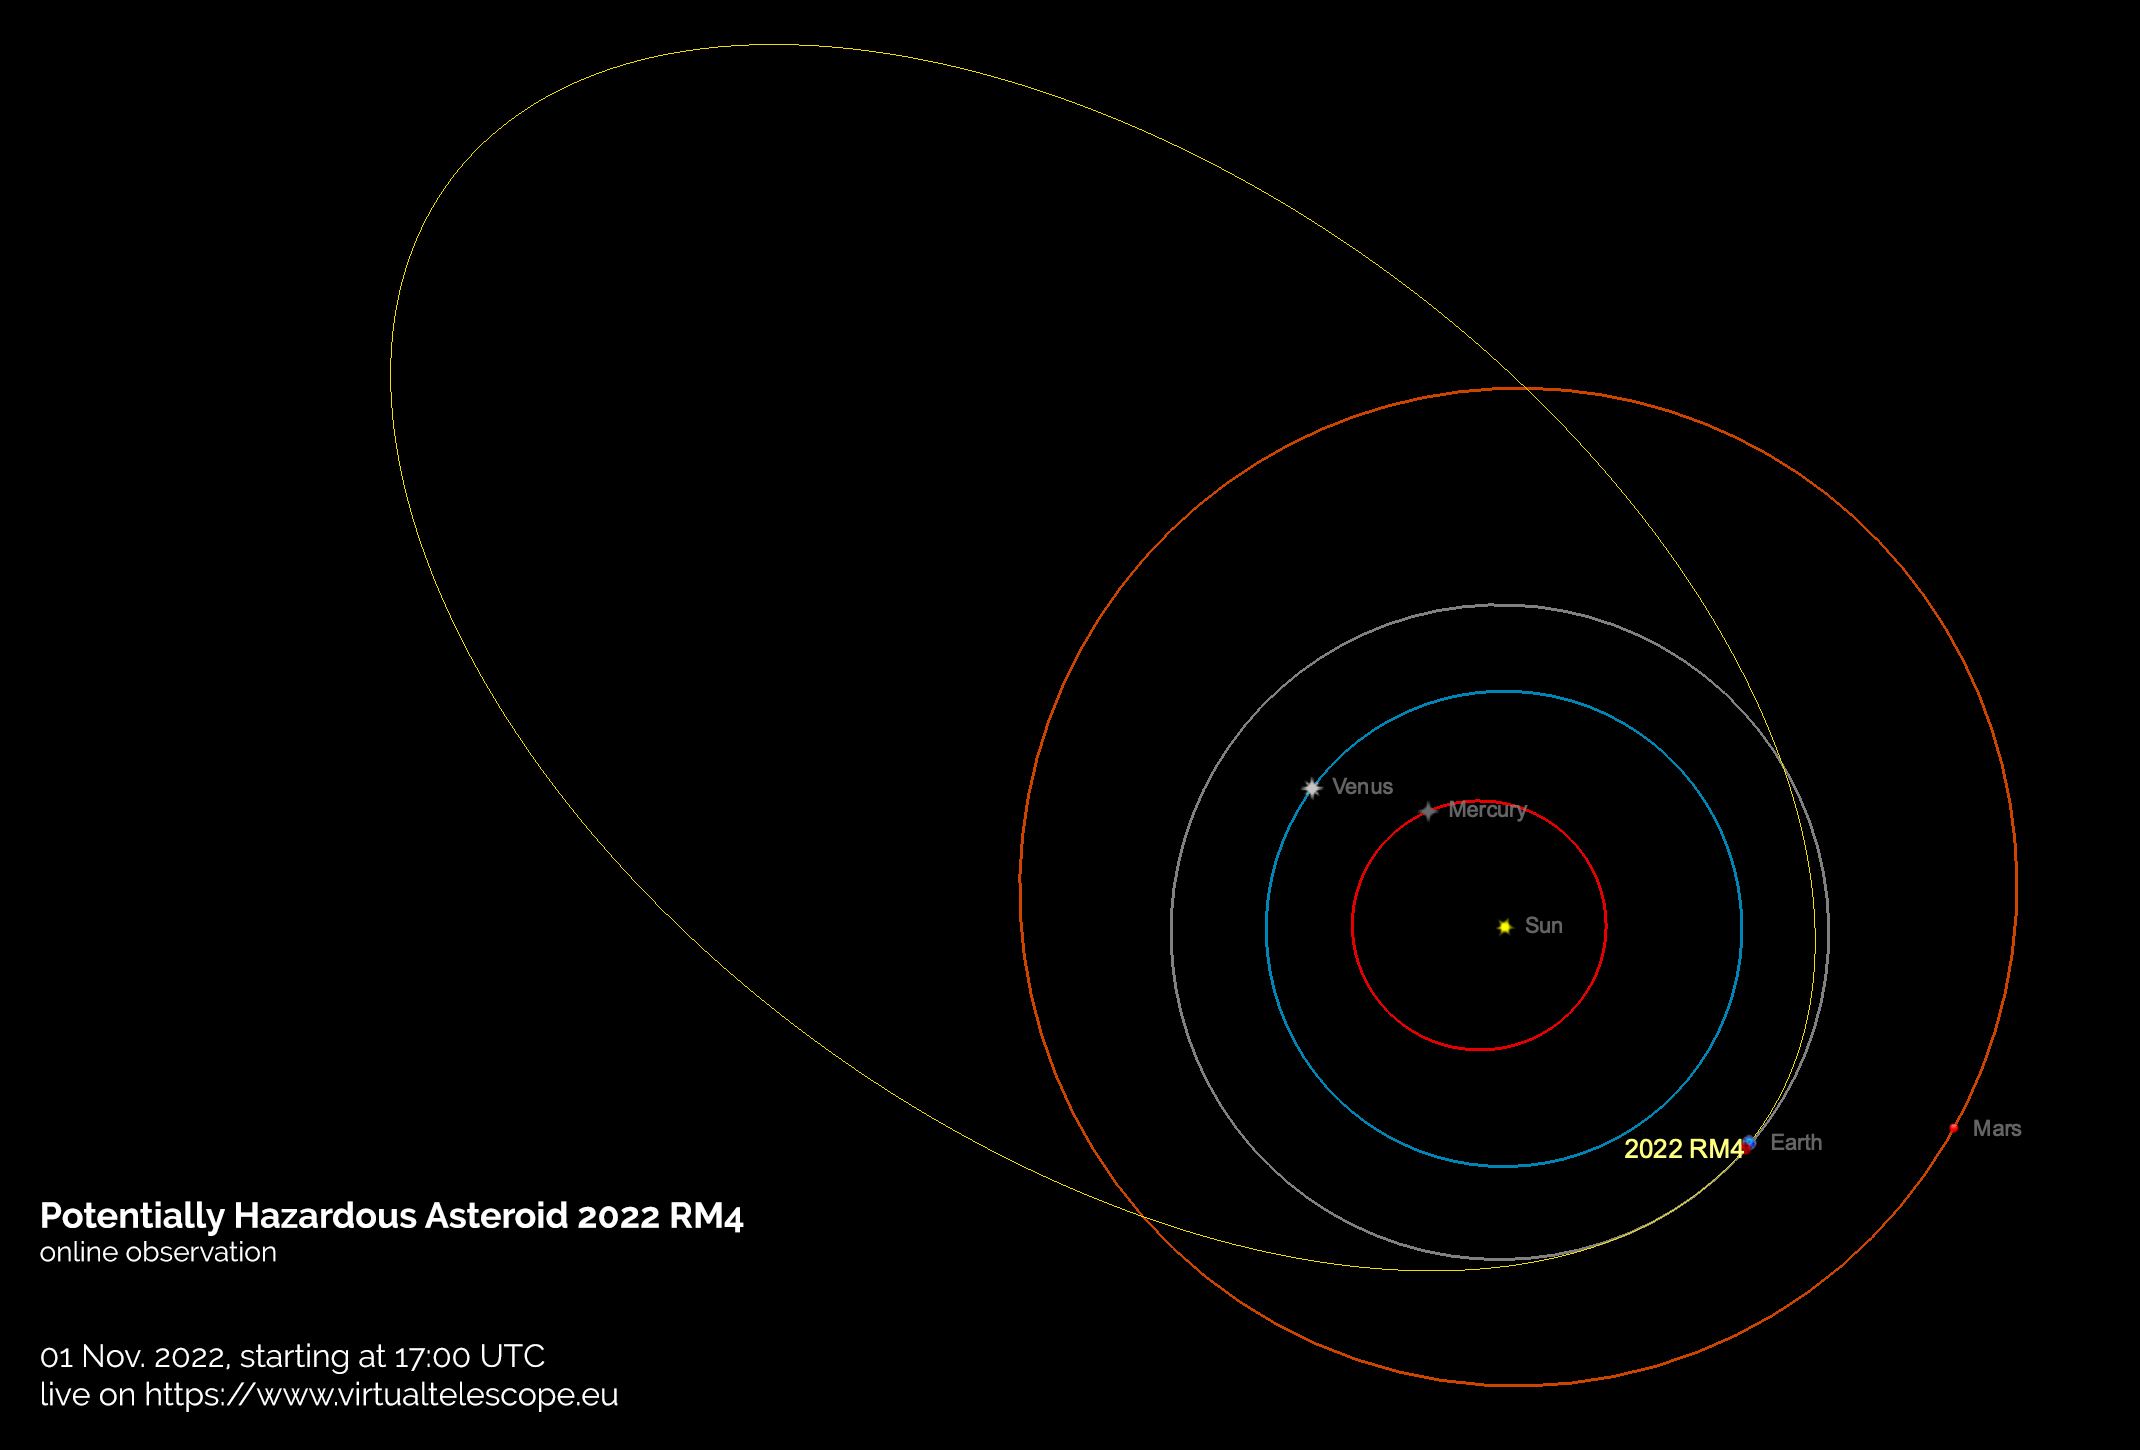 Potentially Hazardous Asteroid 2022 RM4: poster of the event.